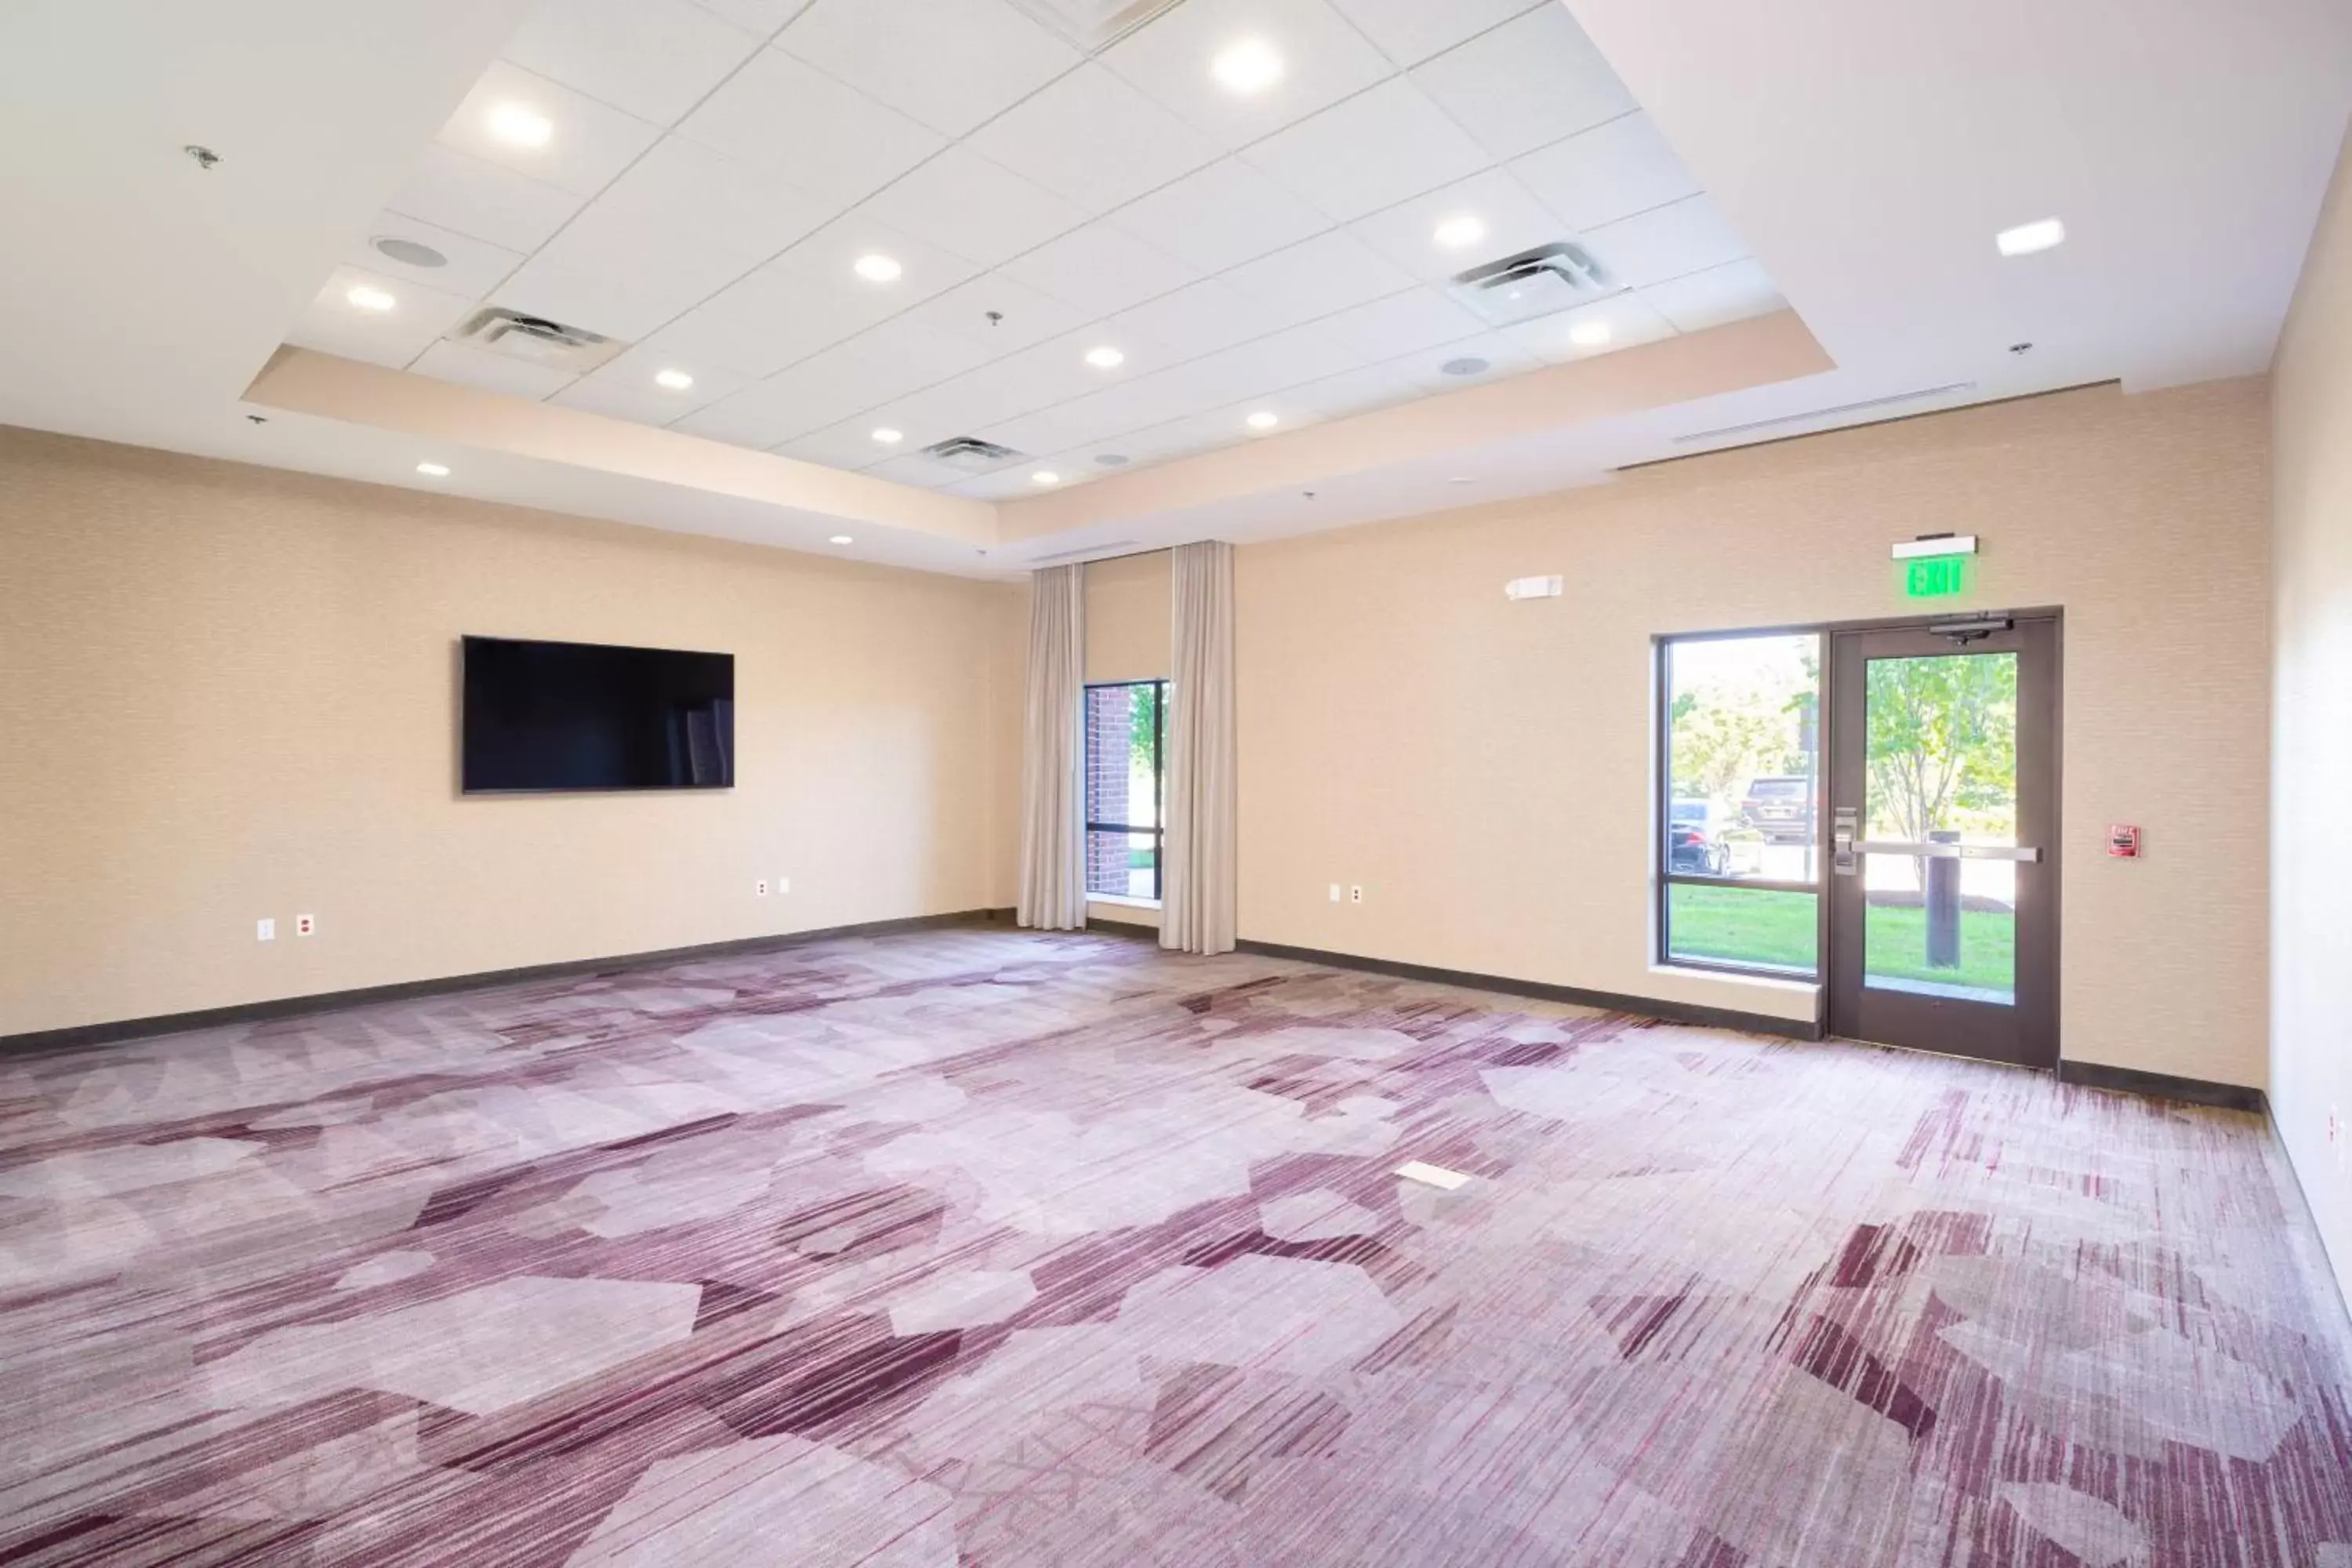 Meeting/conference room in Courtyard by Marriott Bowie